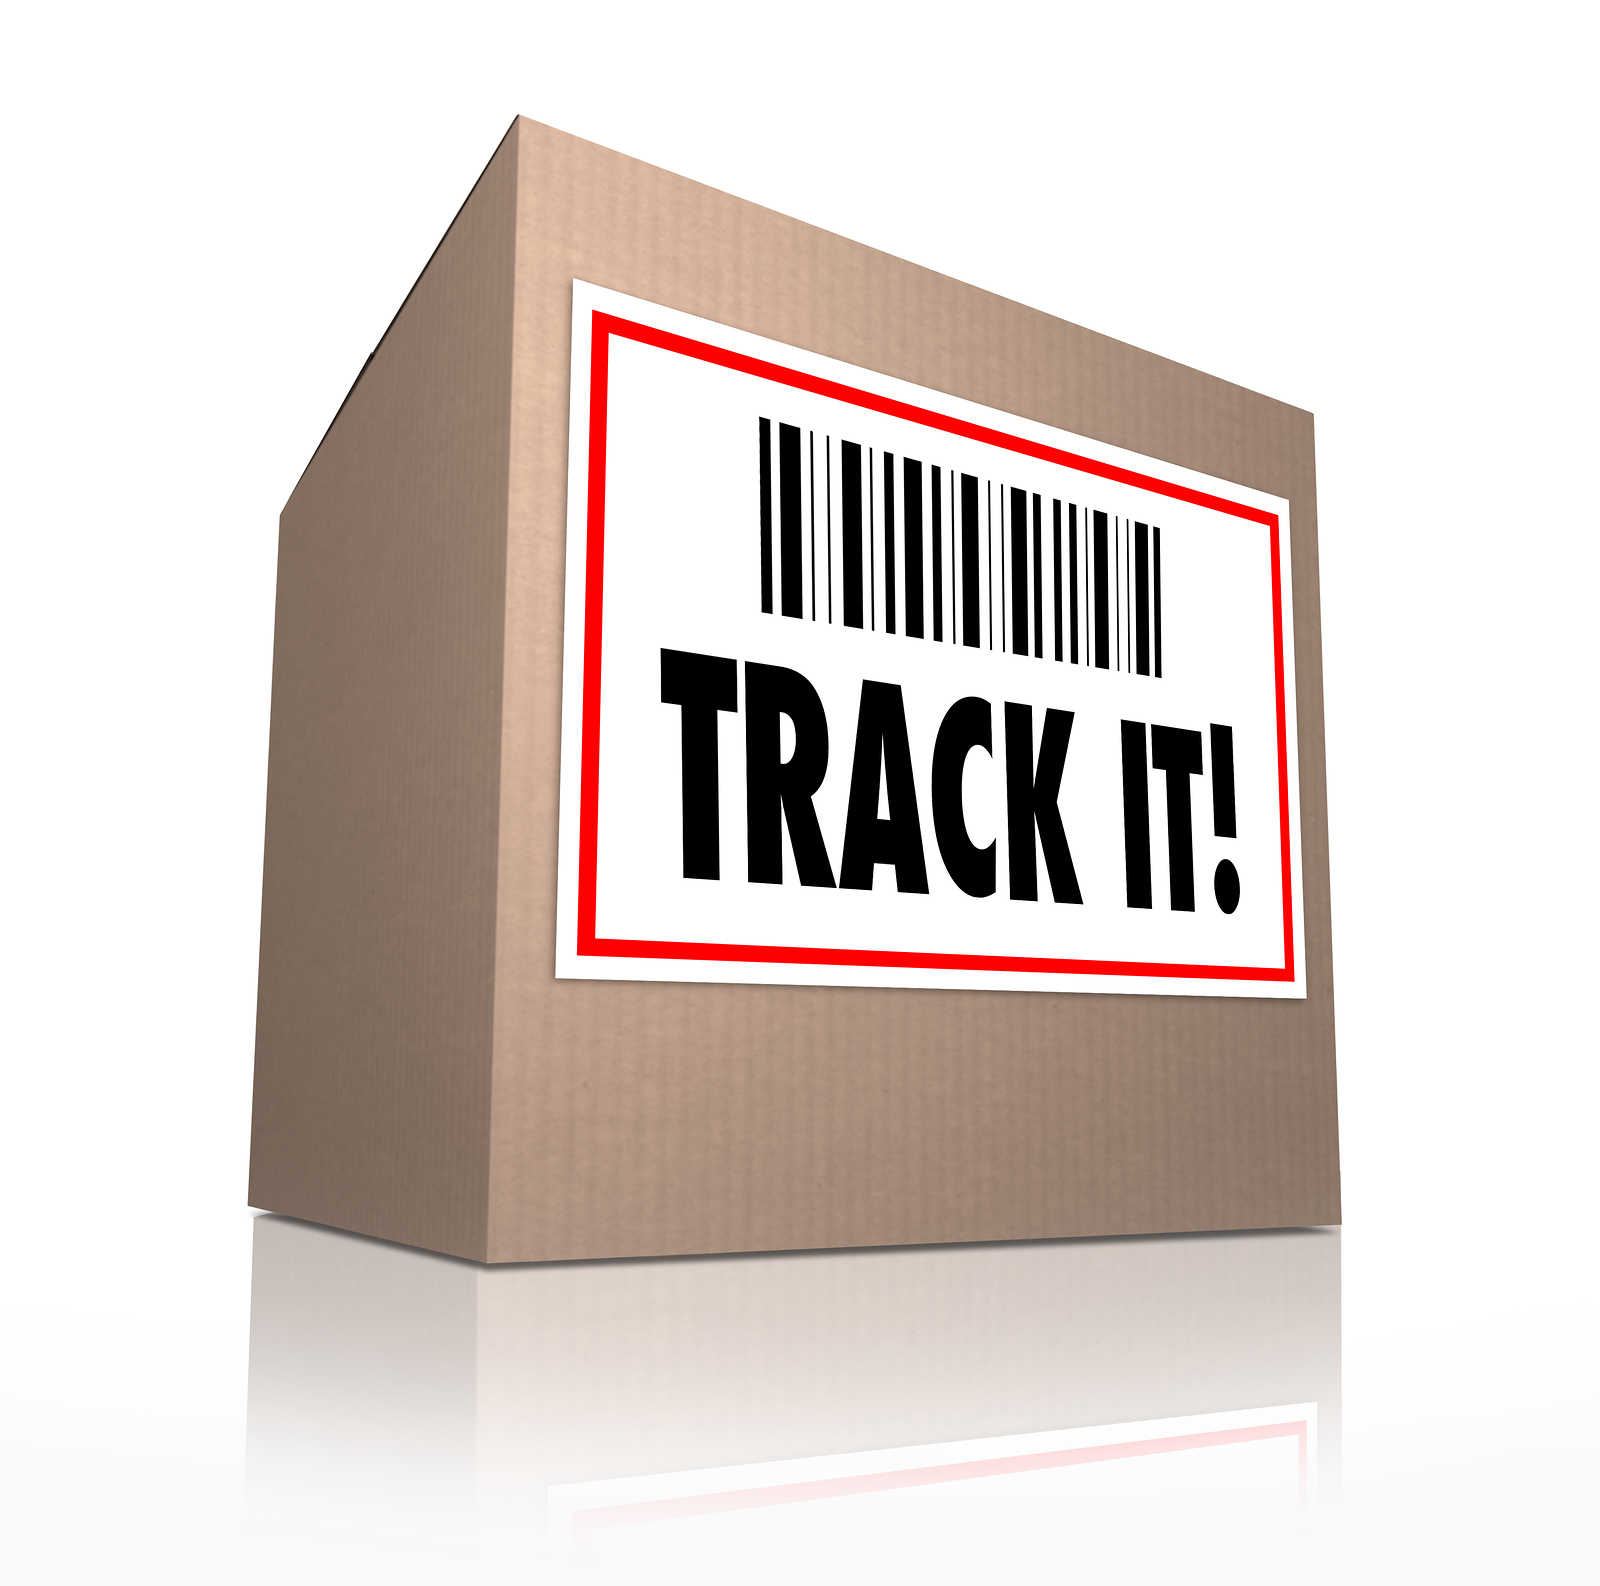 3 REASON TO PROVIDE ORDER TRACKING STATUS